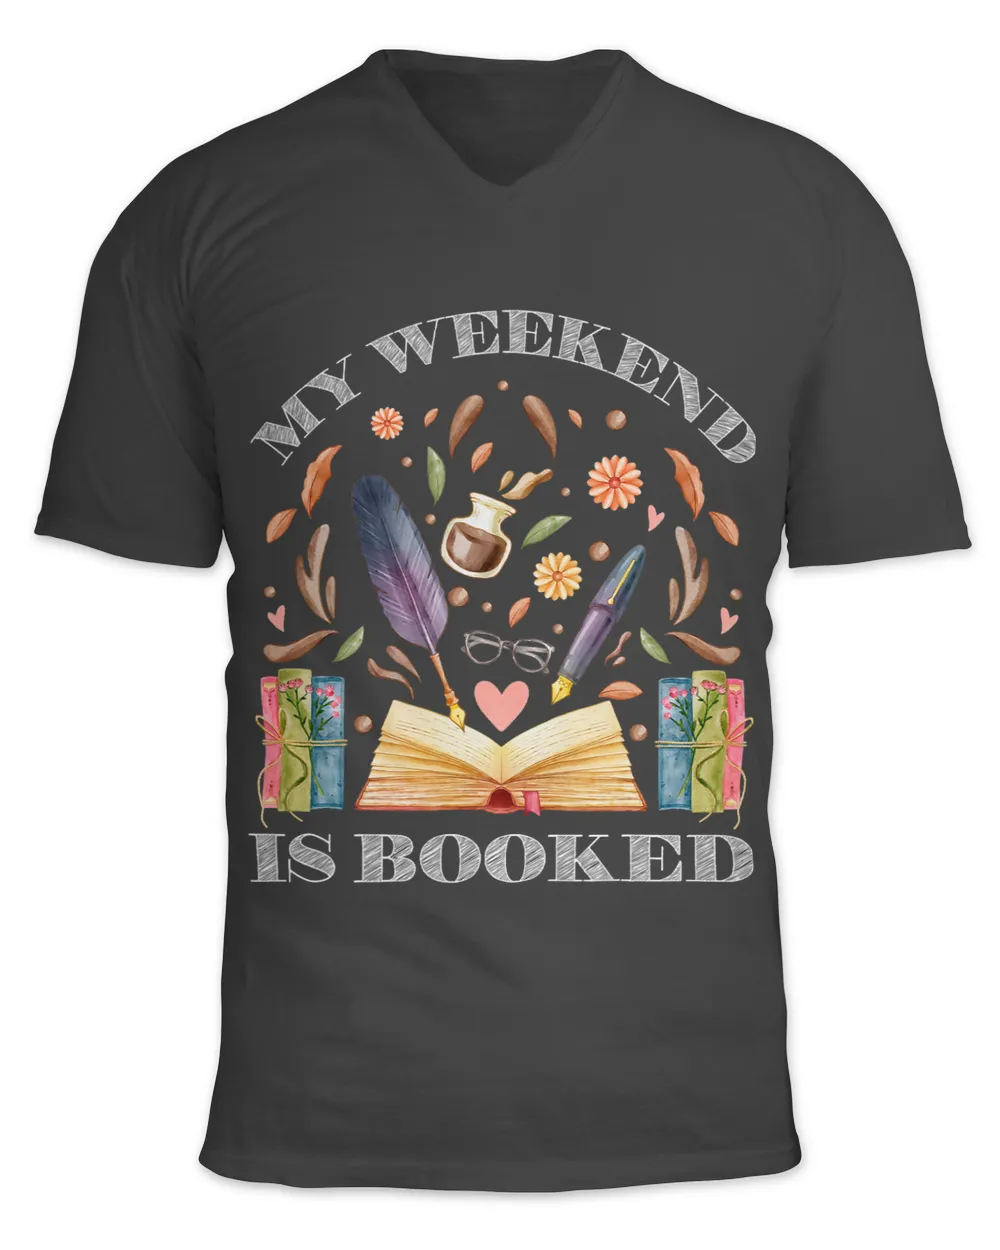 My Weekend is Booked Shirt Bookish Books Lover Bookworm